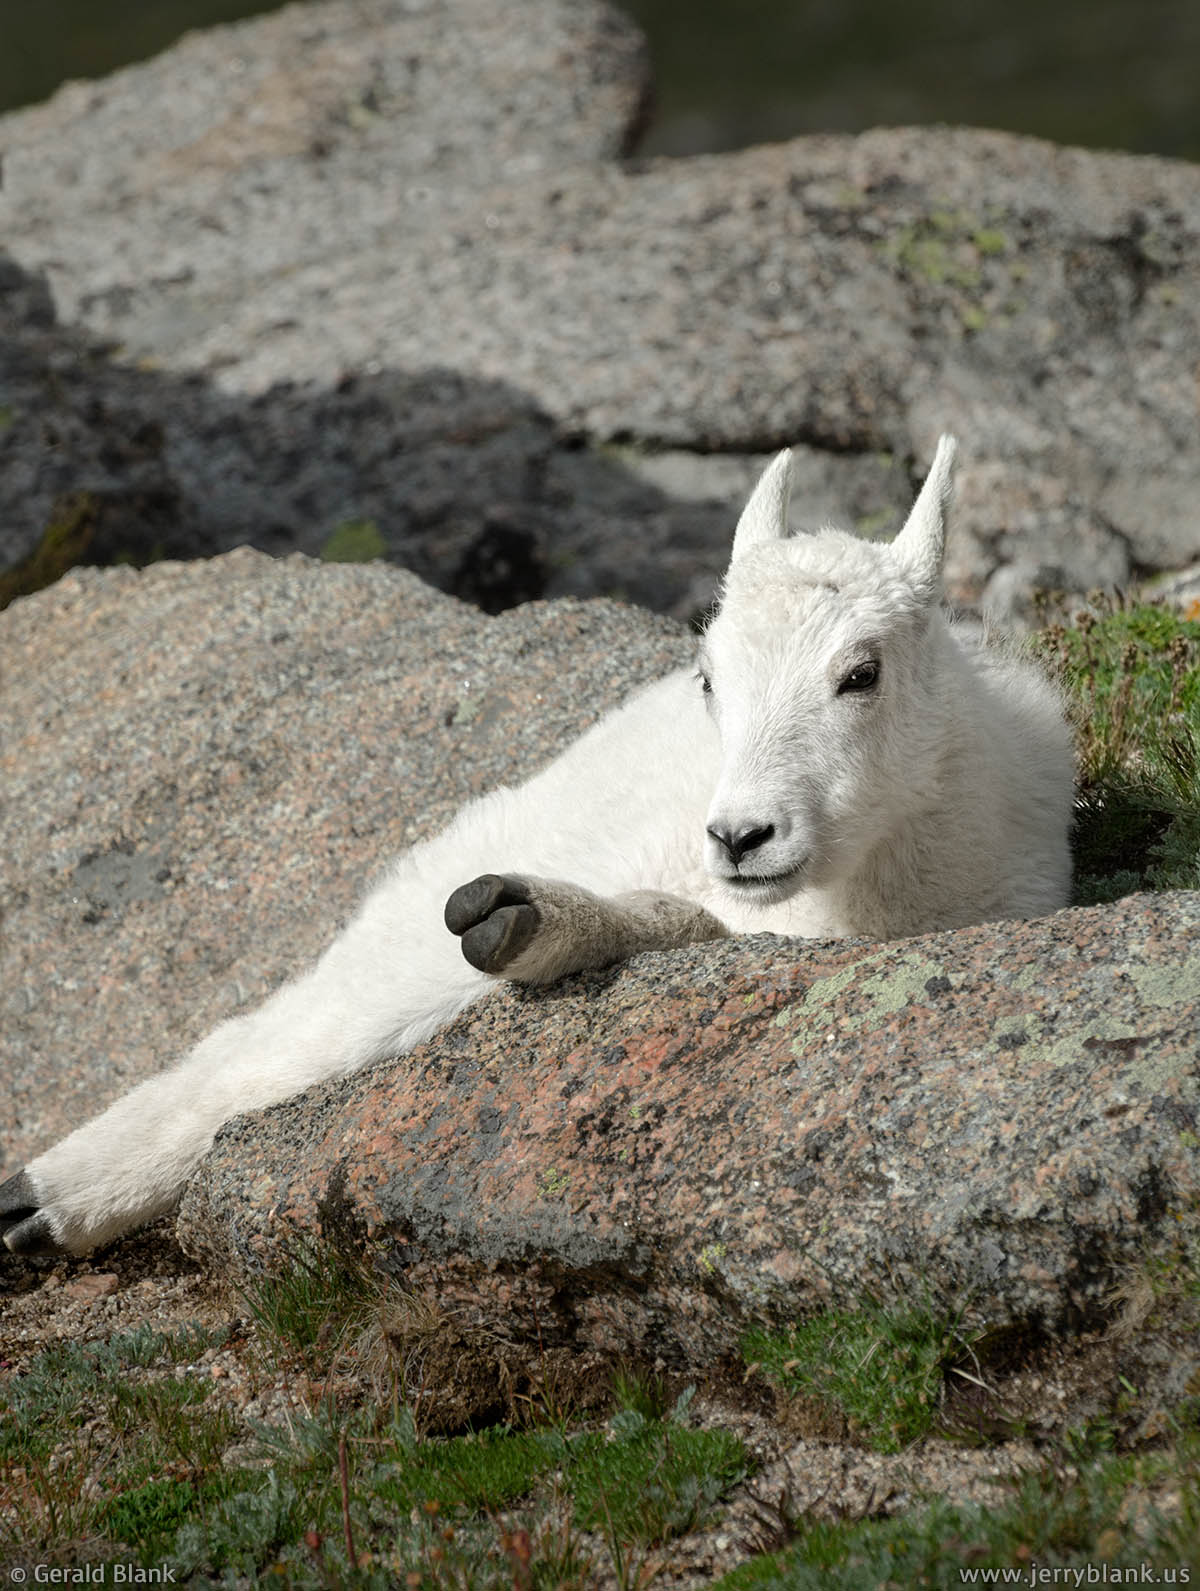 #20530 - A mountain goat kid rests in the sun on Mount Evans, Colorado - photo by Jerry Blank